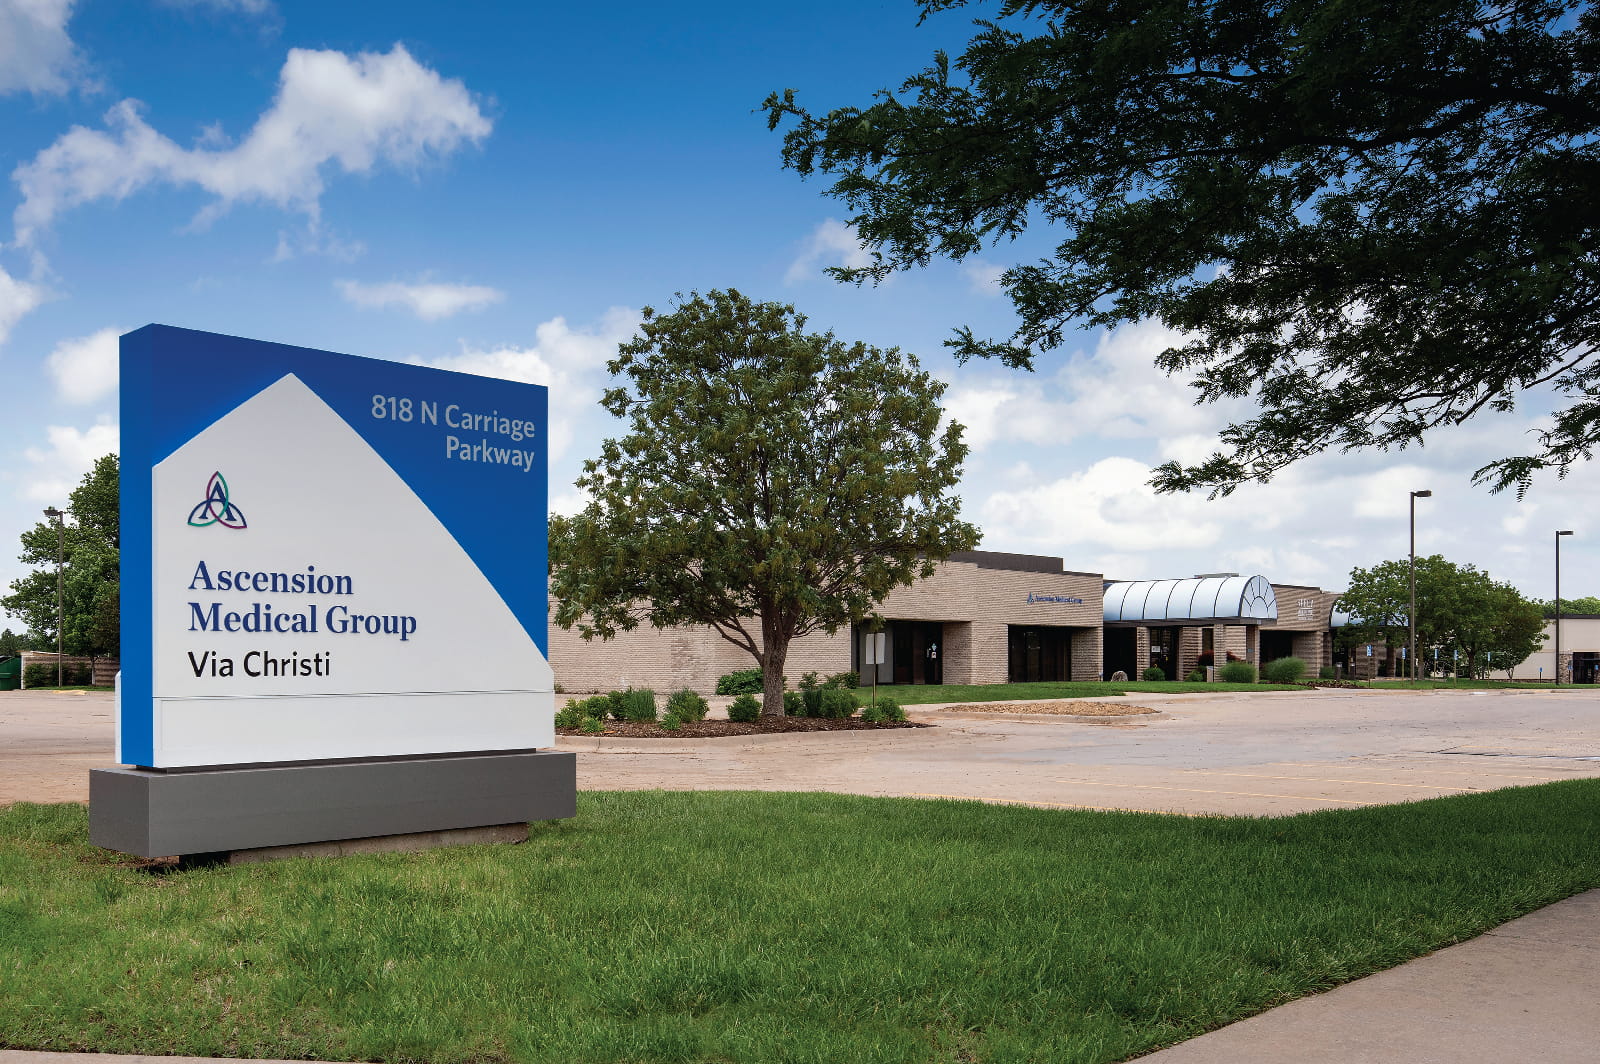 Ascension Medical Group Via Christi on Carriage Parkway